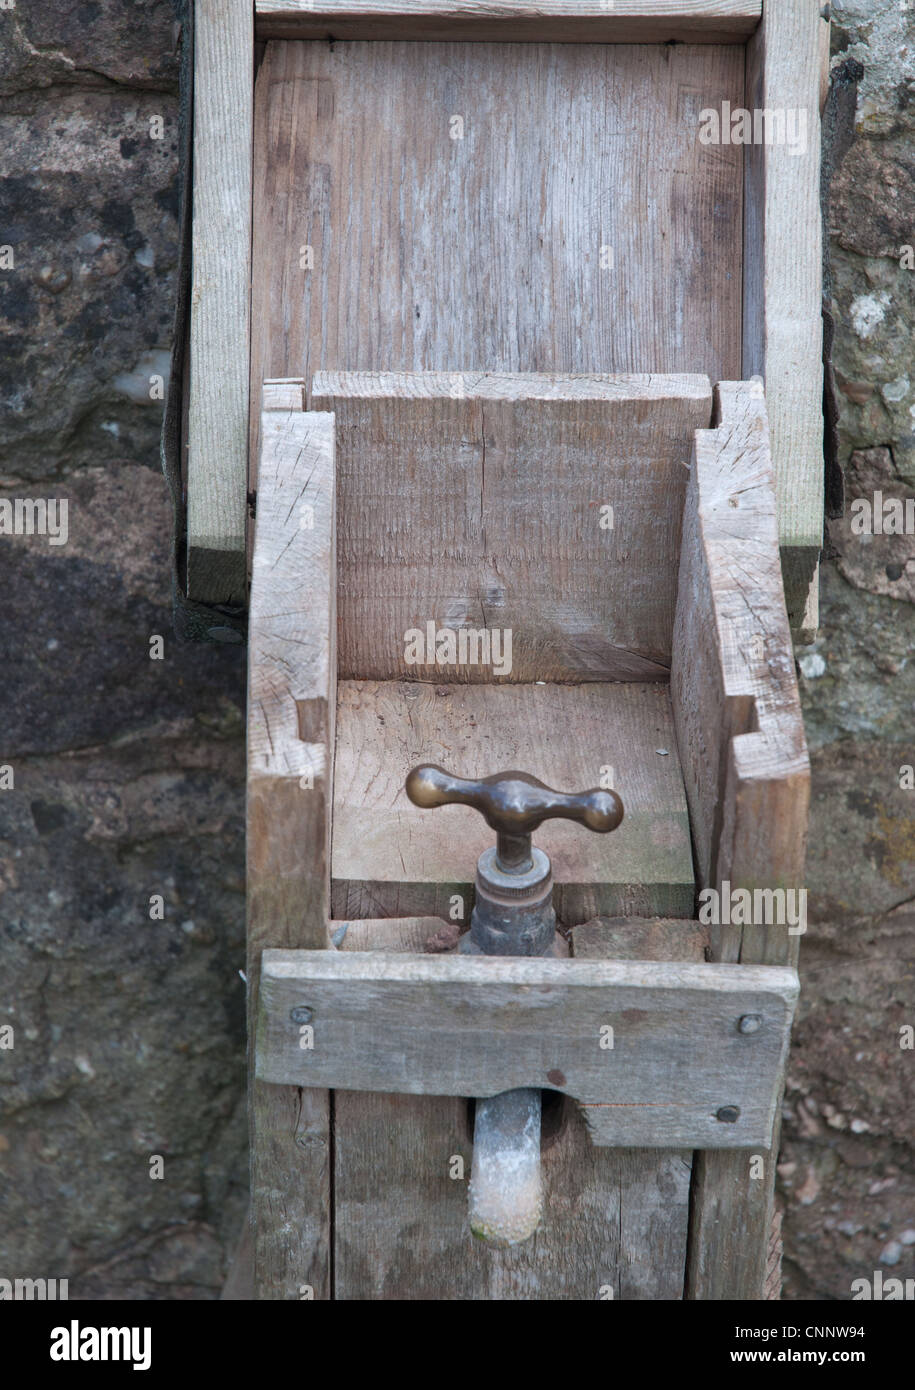 old brass external water tap providing water for churchyard contained in wooden boxing as frost protection Stock Photo